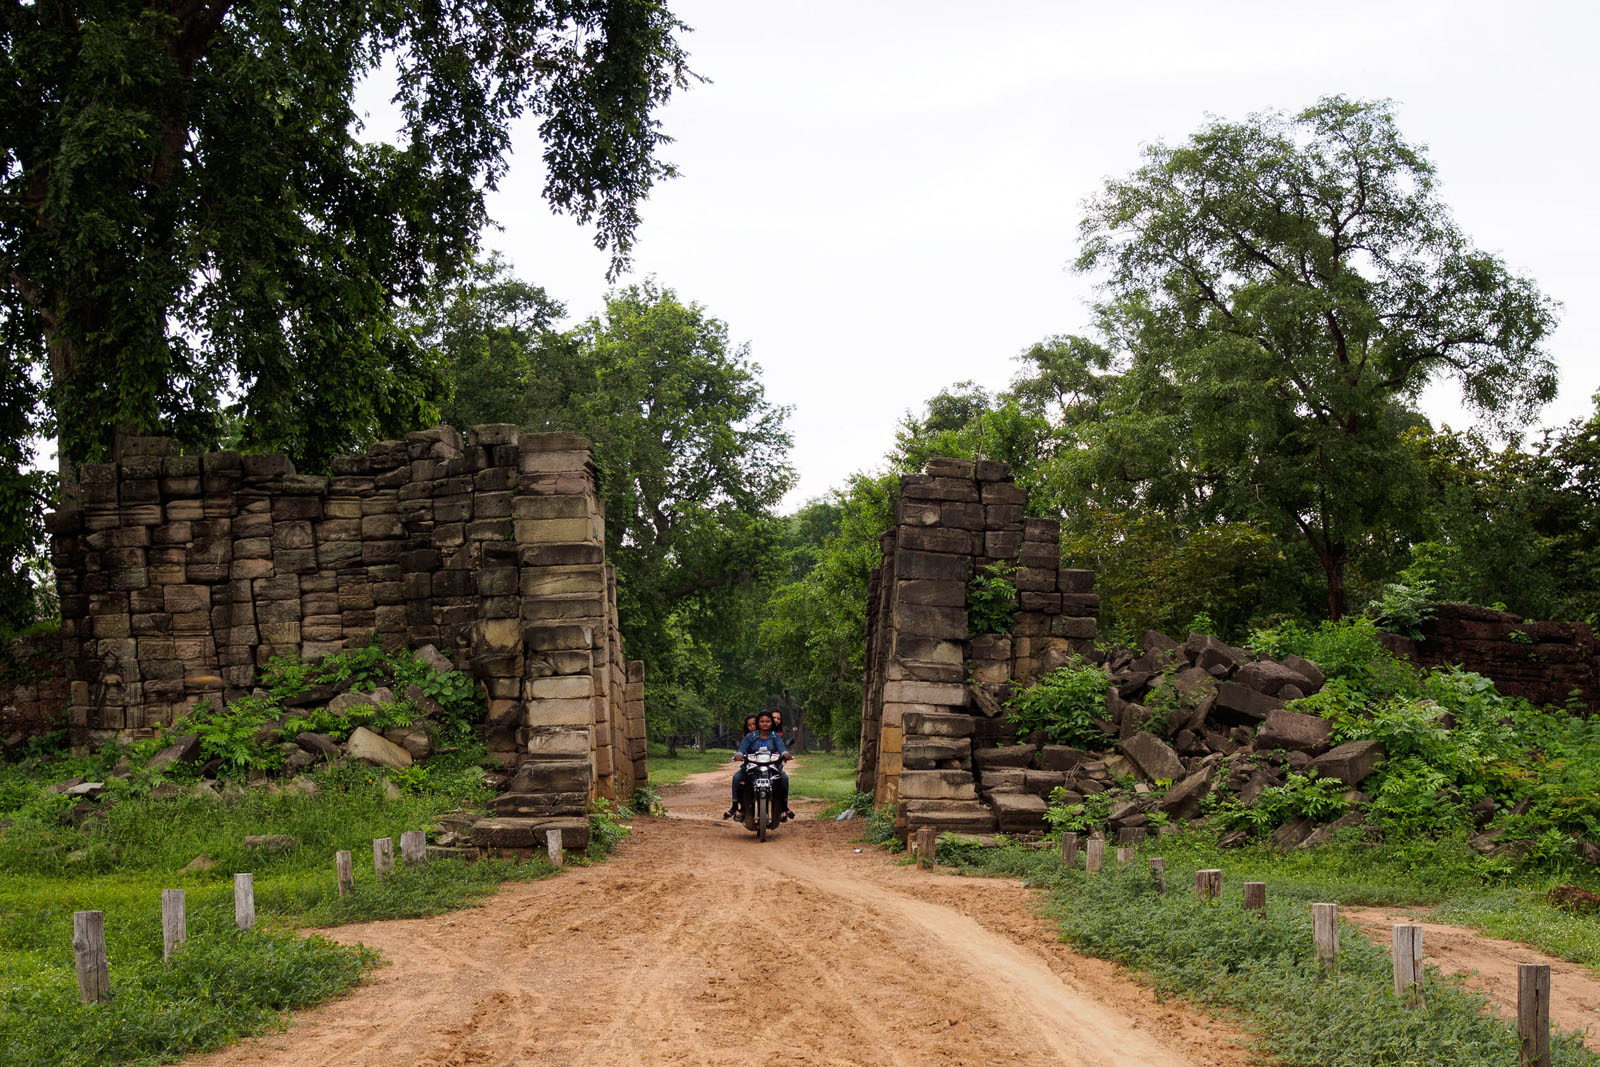 A group of local women ride a motorbike through the stone gates of Banteay Chhmar temple. Photo by Emily Lush